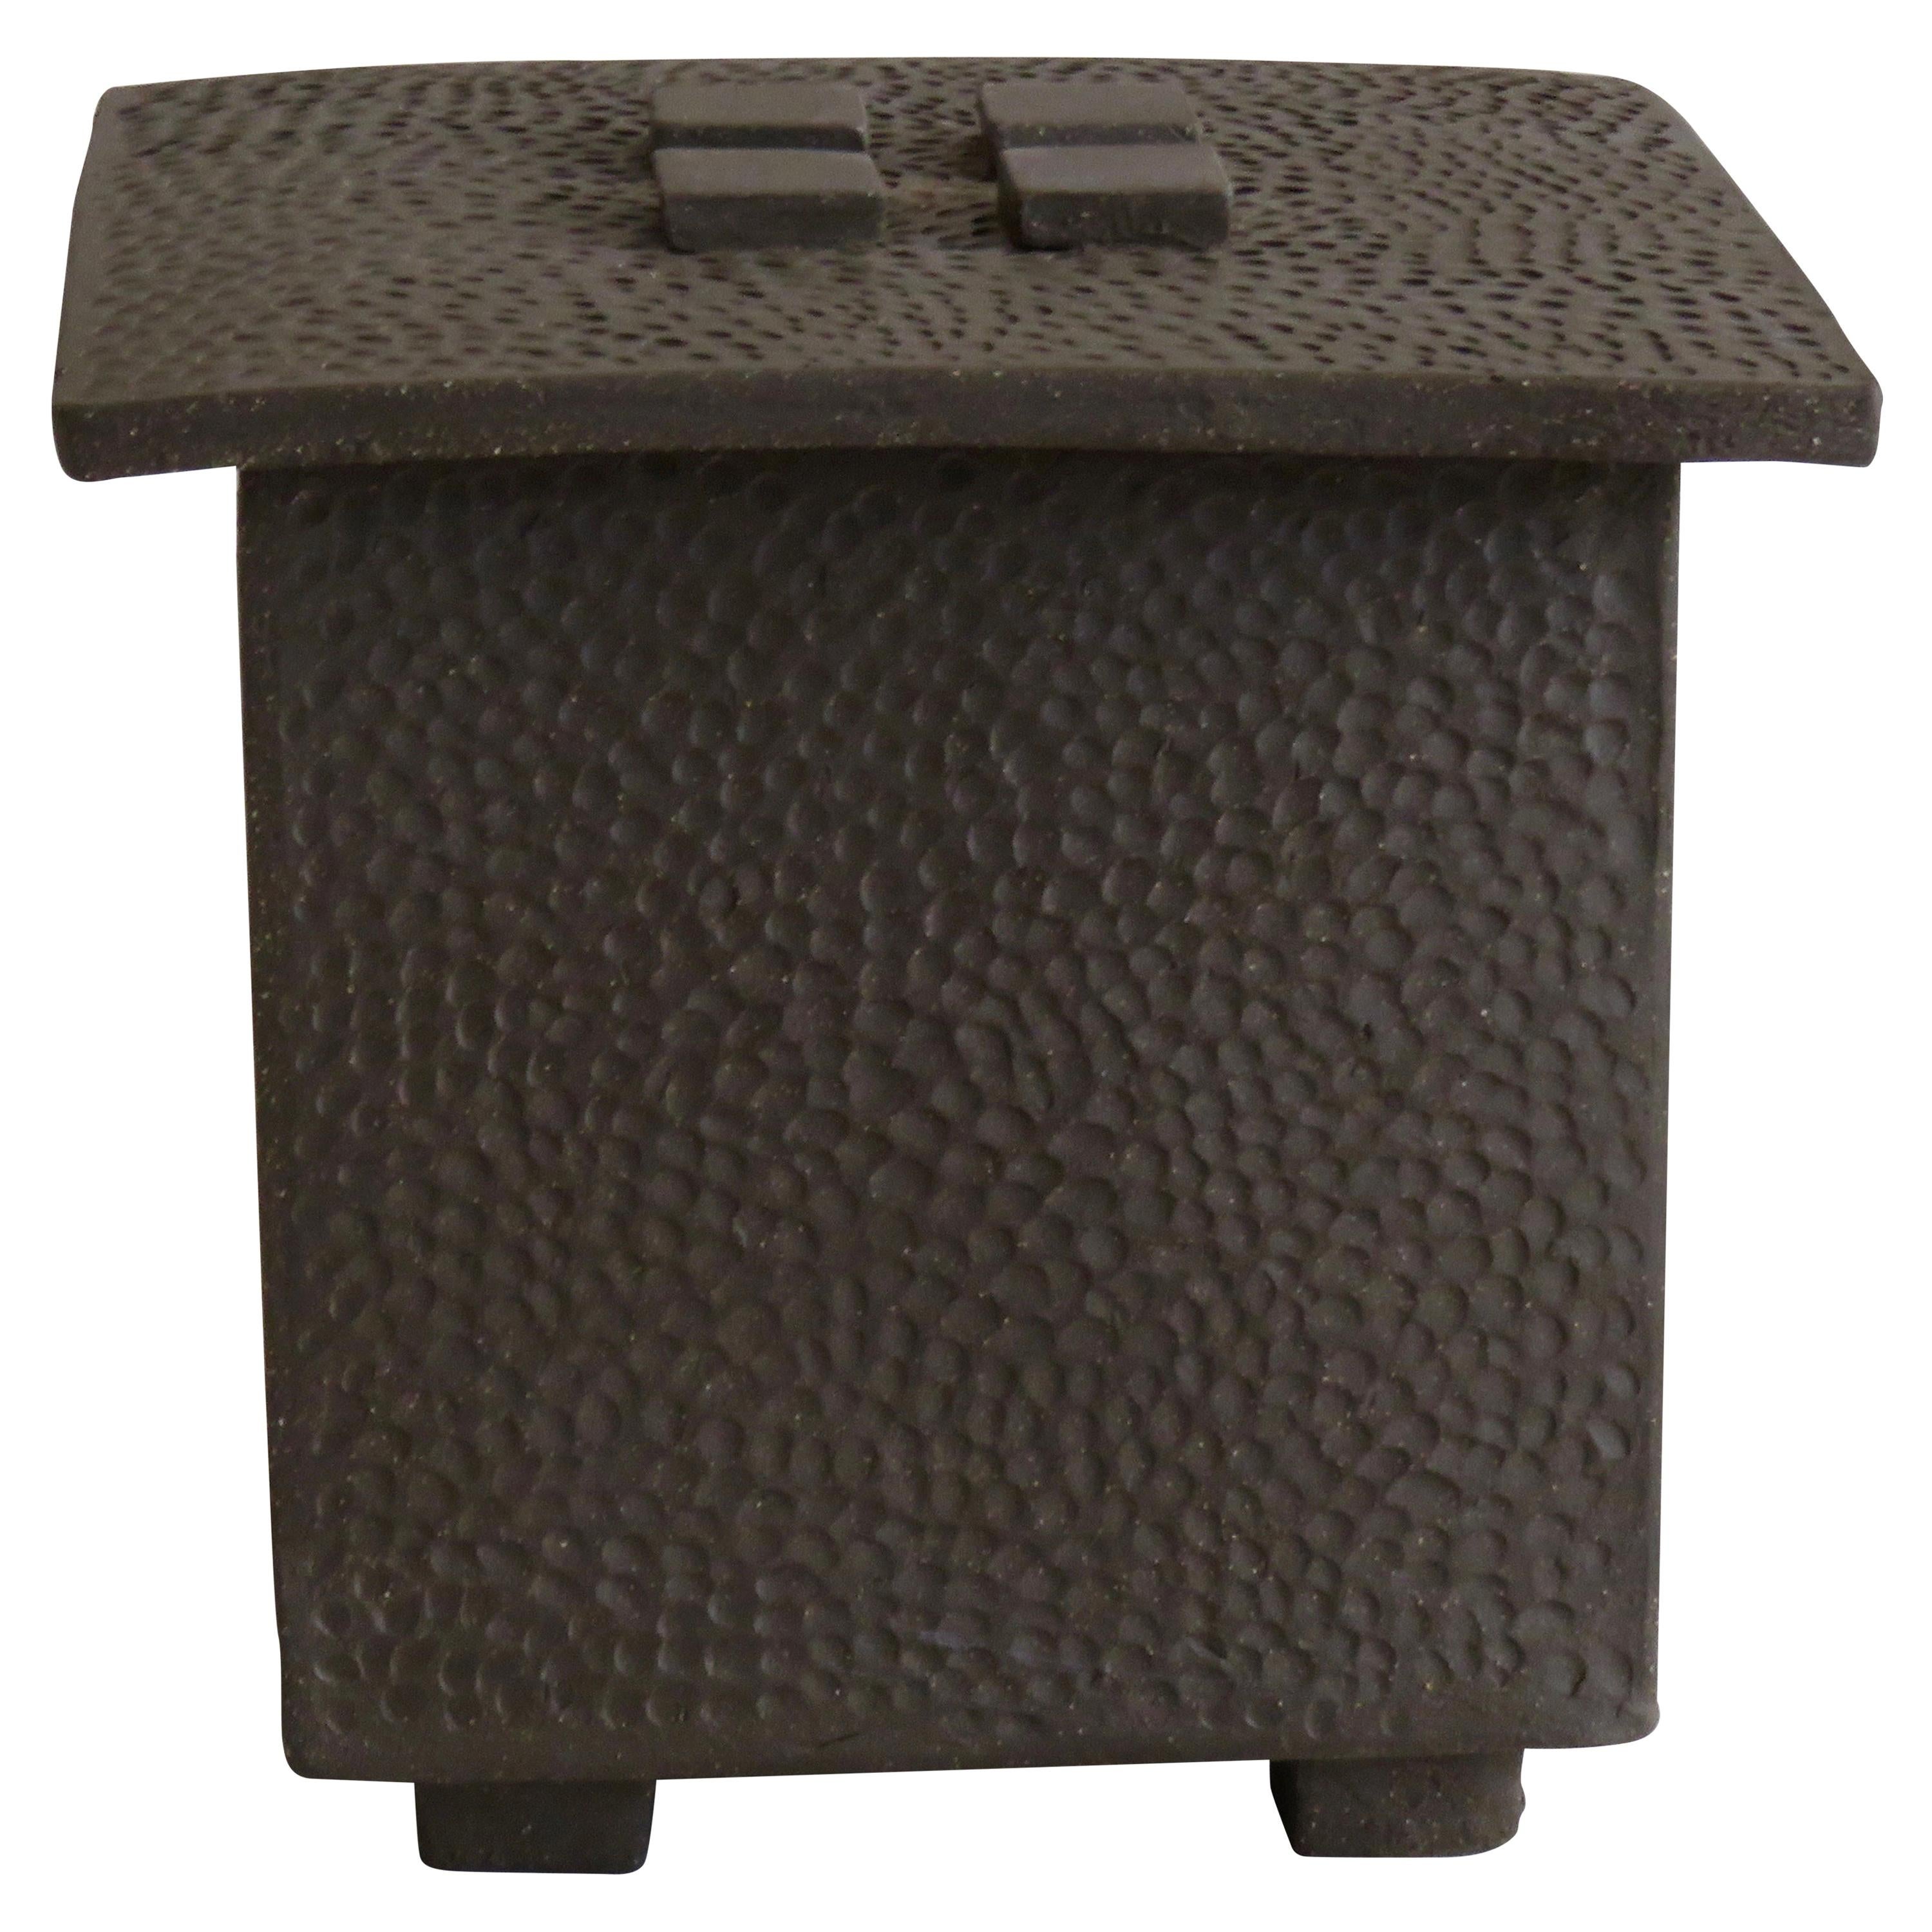 Hand-Textured Box in Raw Brown Clay with Orange Glazed Interior and Lid